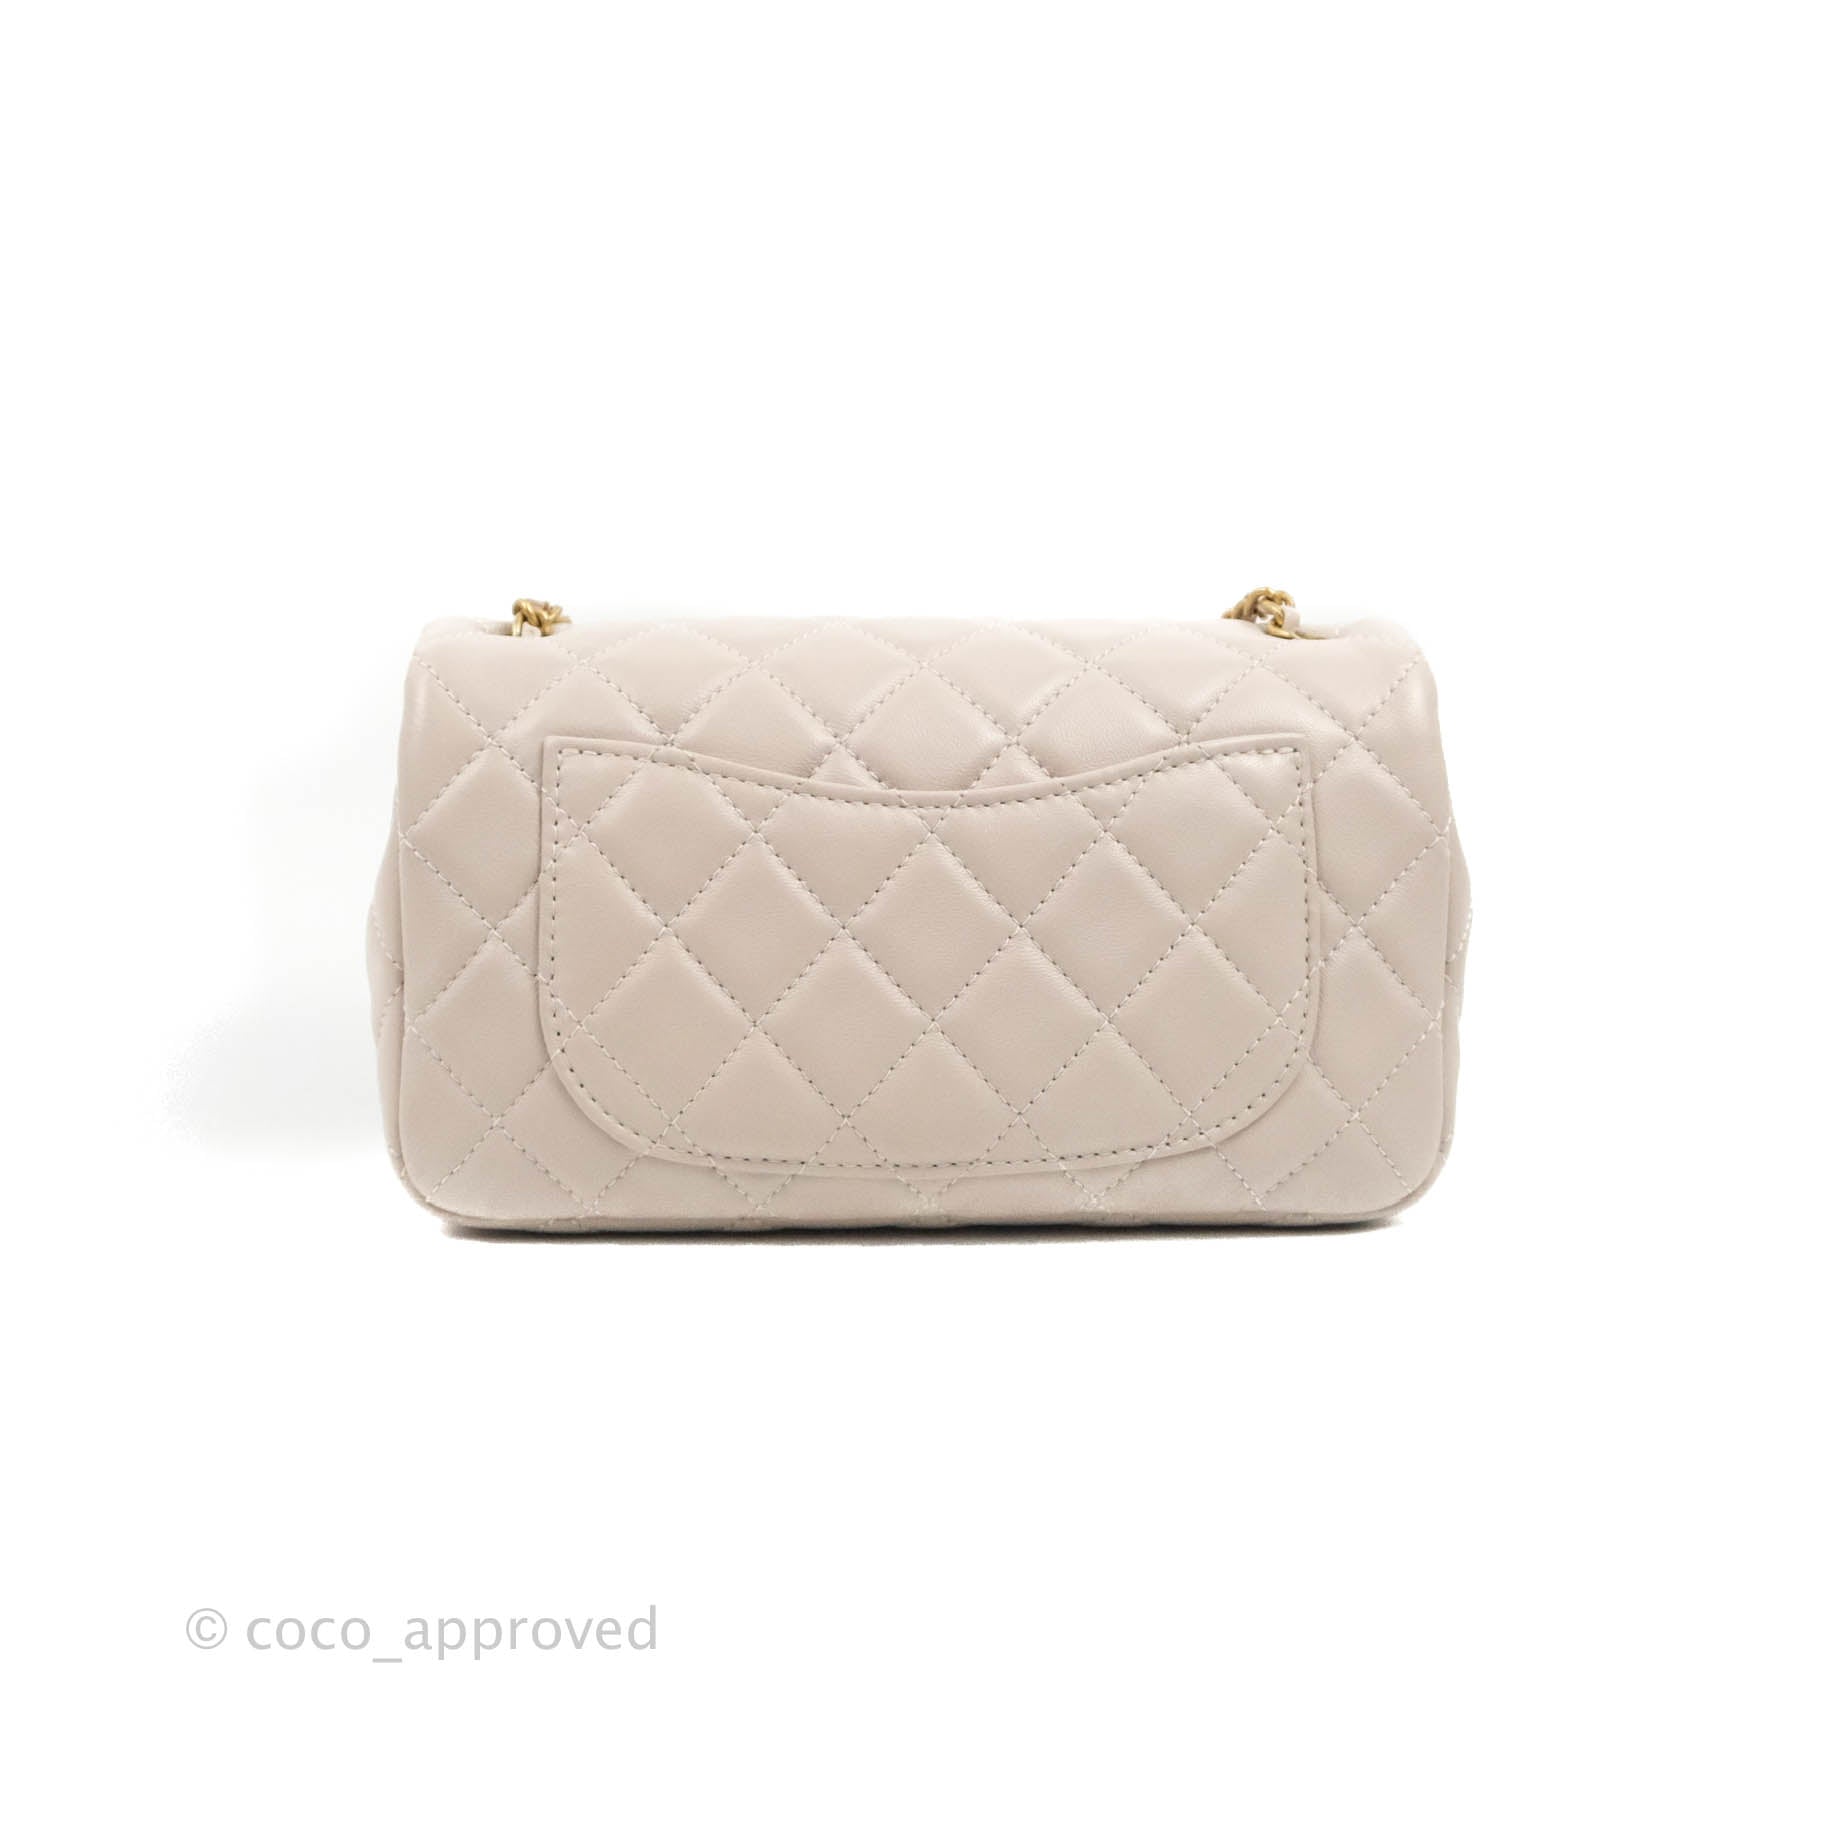 Chanel Bags & Purses for Sale at Auction